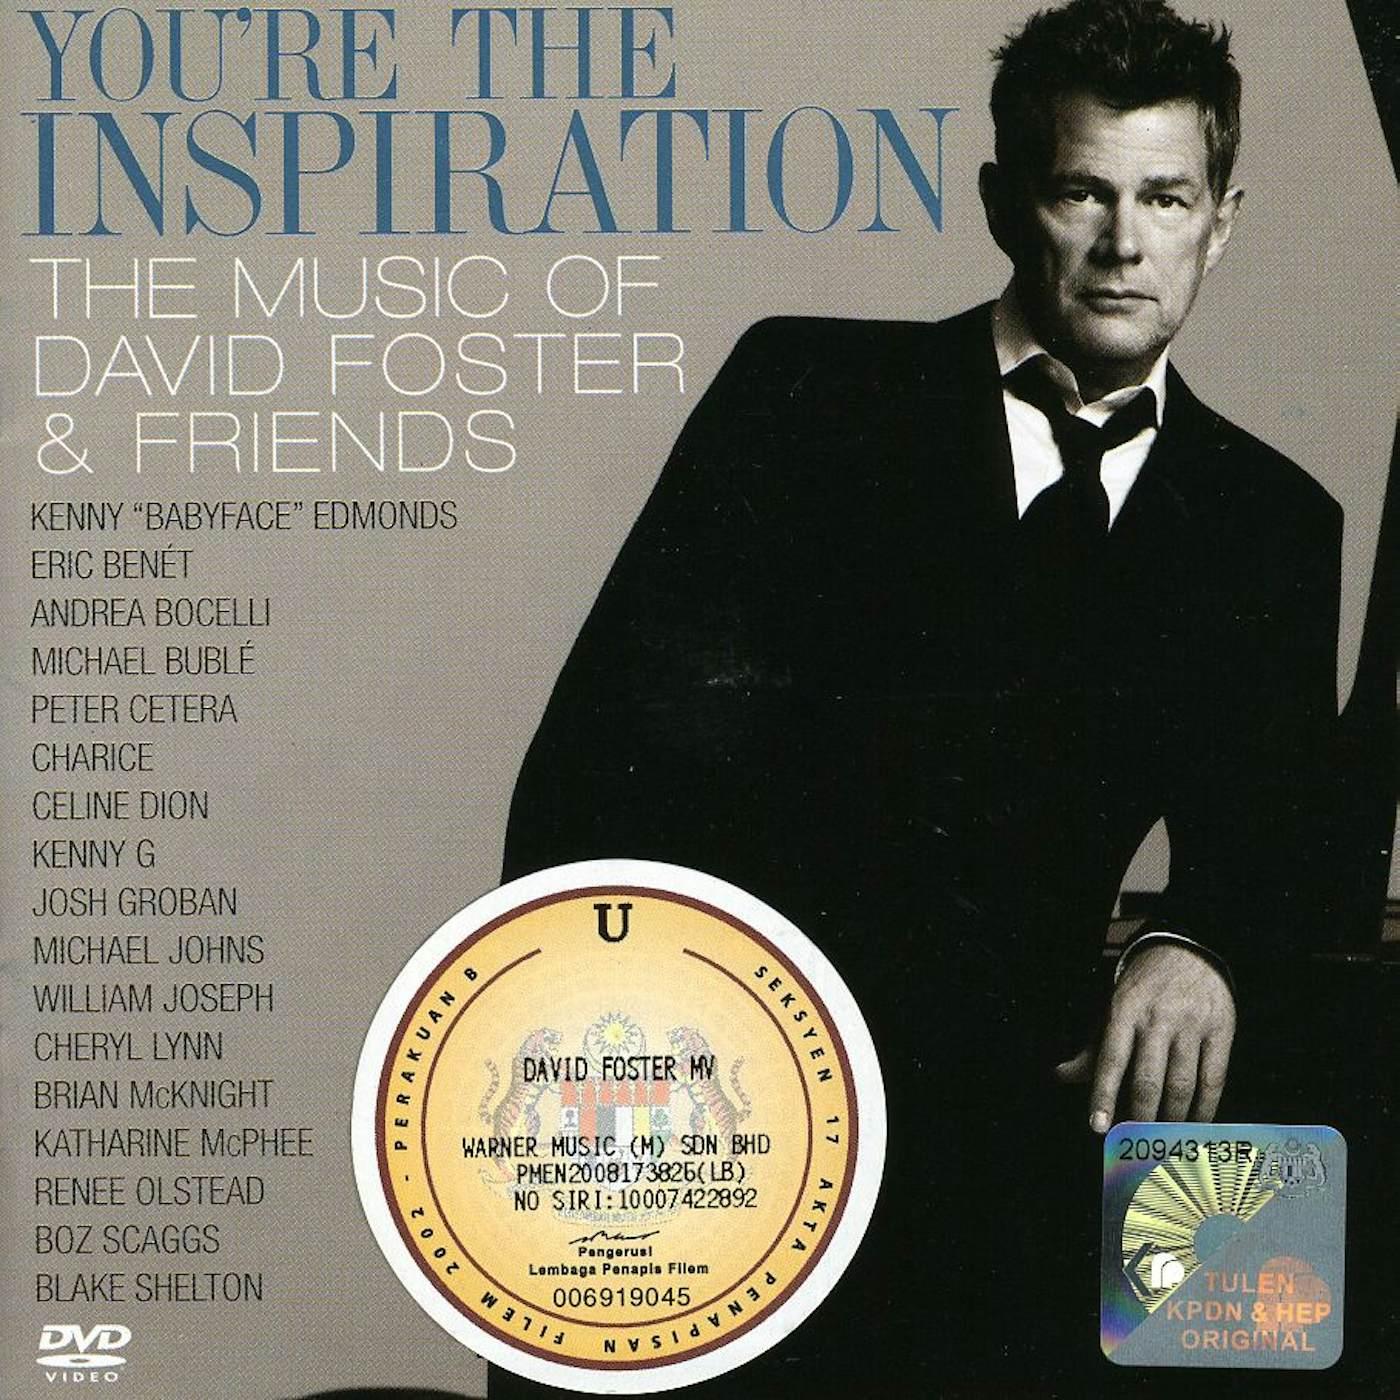 YOU'RE THE INSPIRATION: MUSIC OF DAVID FOSTER CD